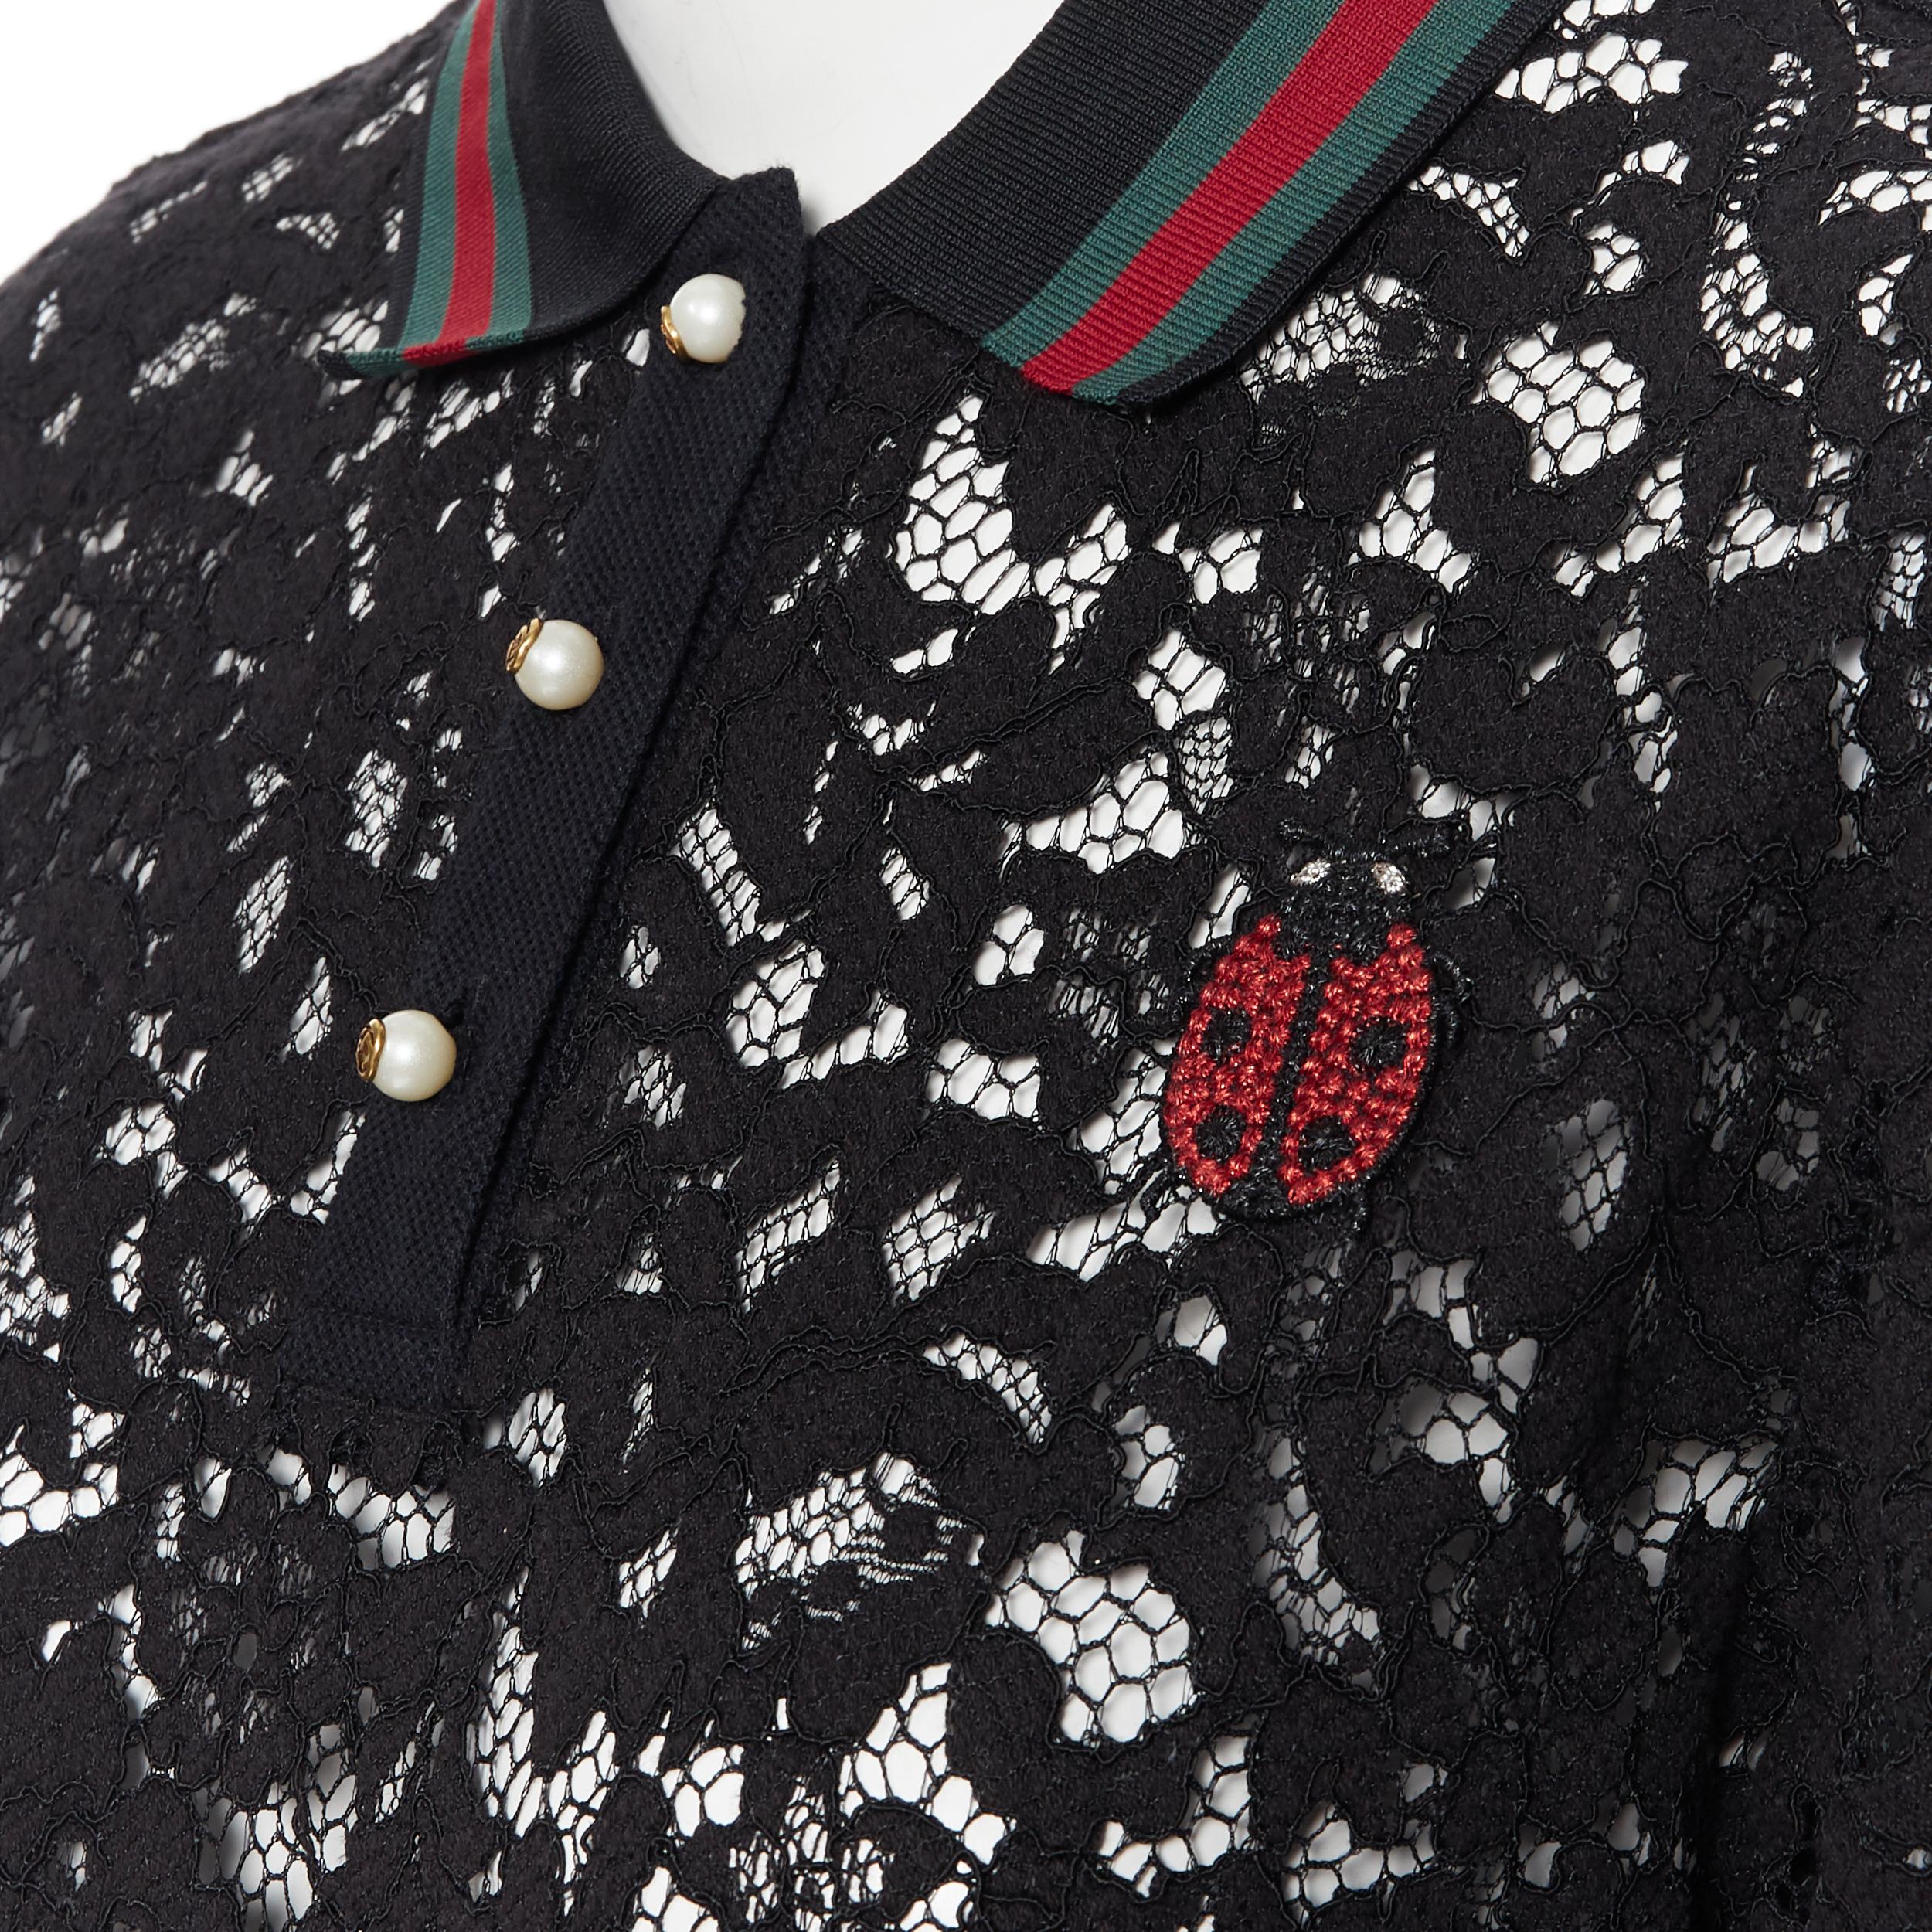 GUCCI MICHELE black floral lace signature red green web pearl button polo top L
Brand: Gucci
Designer: Alessandro Michele
Model Name / Style: Lace polo
Material: Lace; composition label removed
Color: Black
Pattern: Floral
Closure: Button
Extra